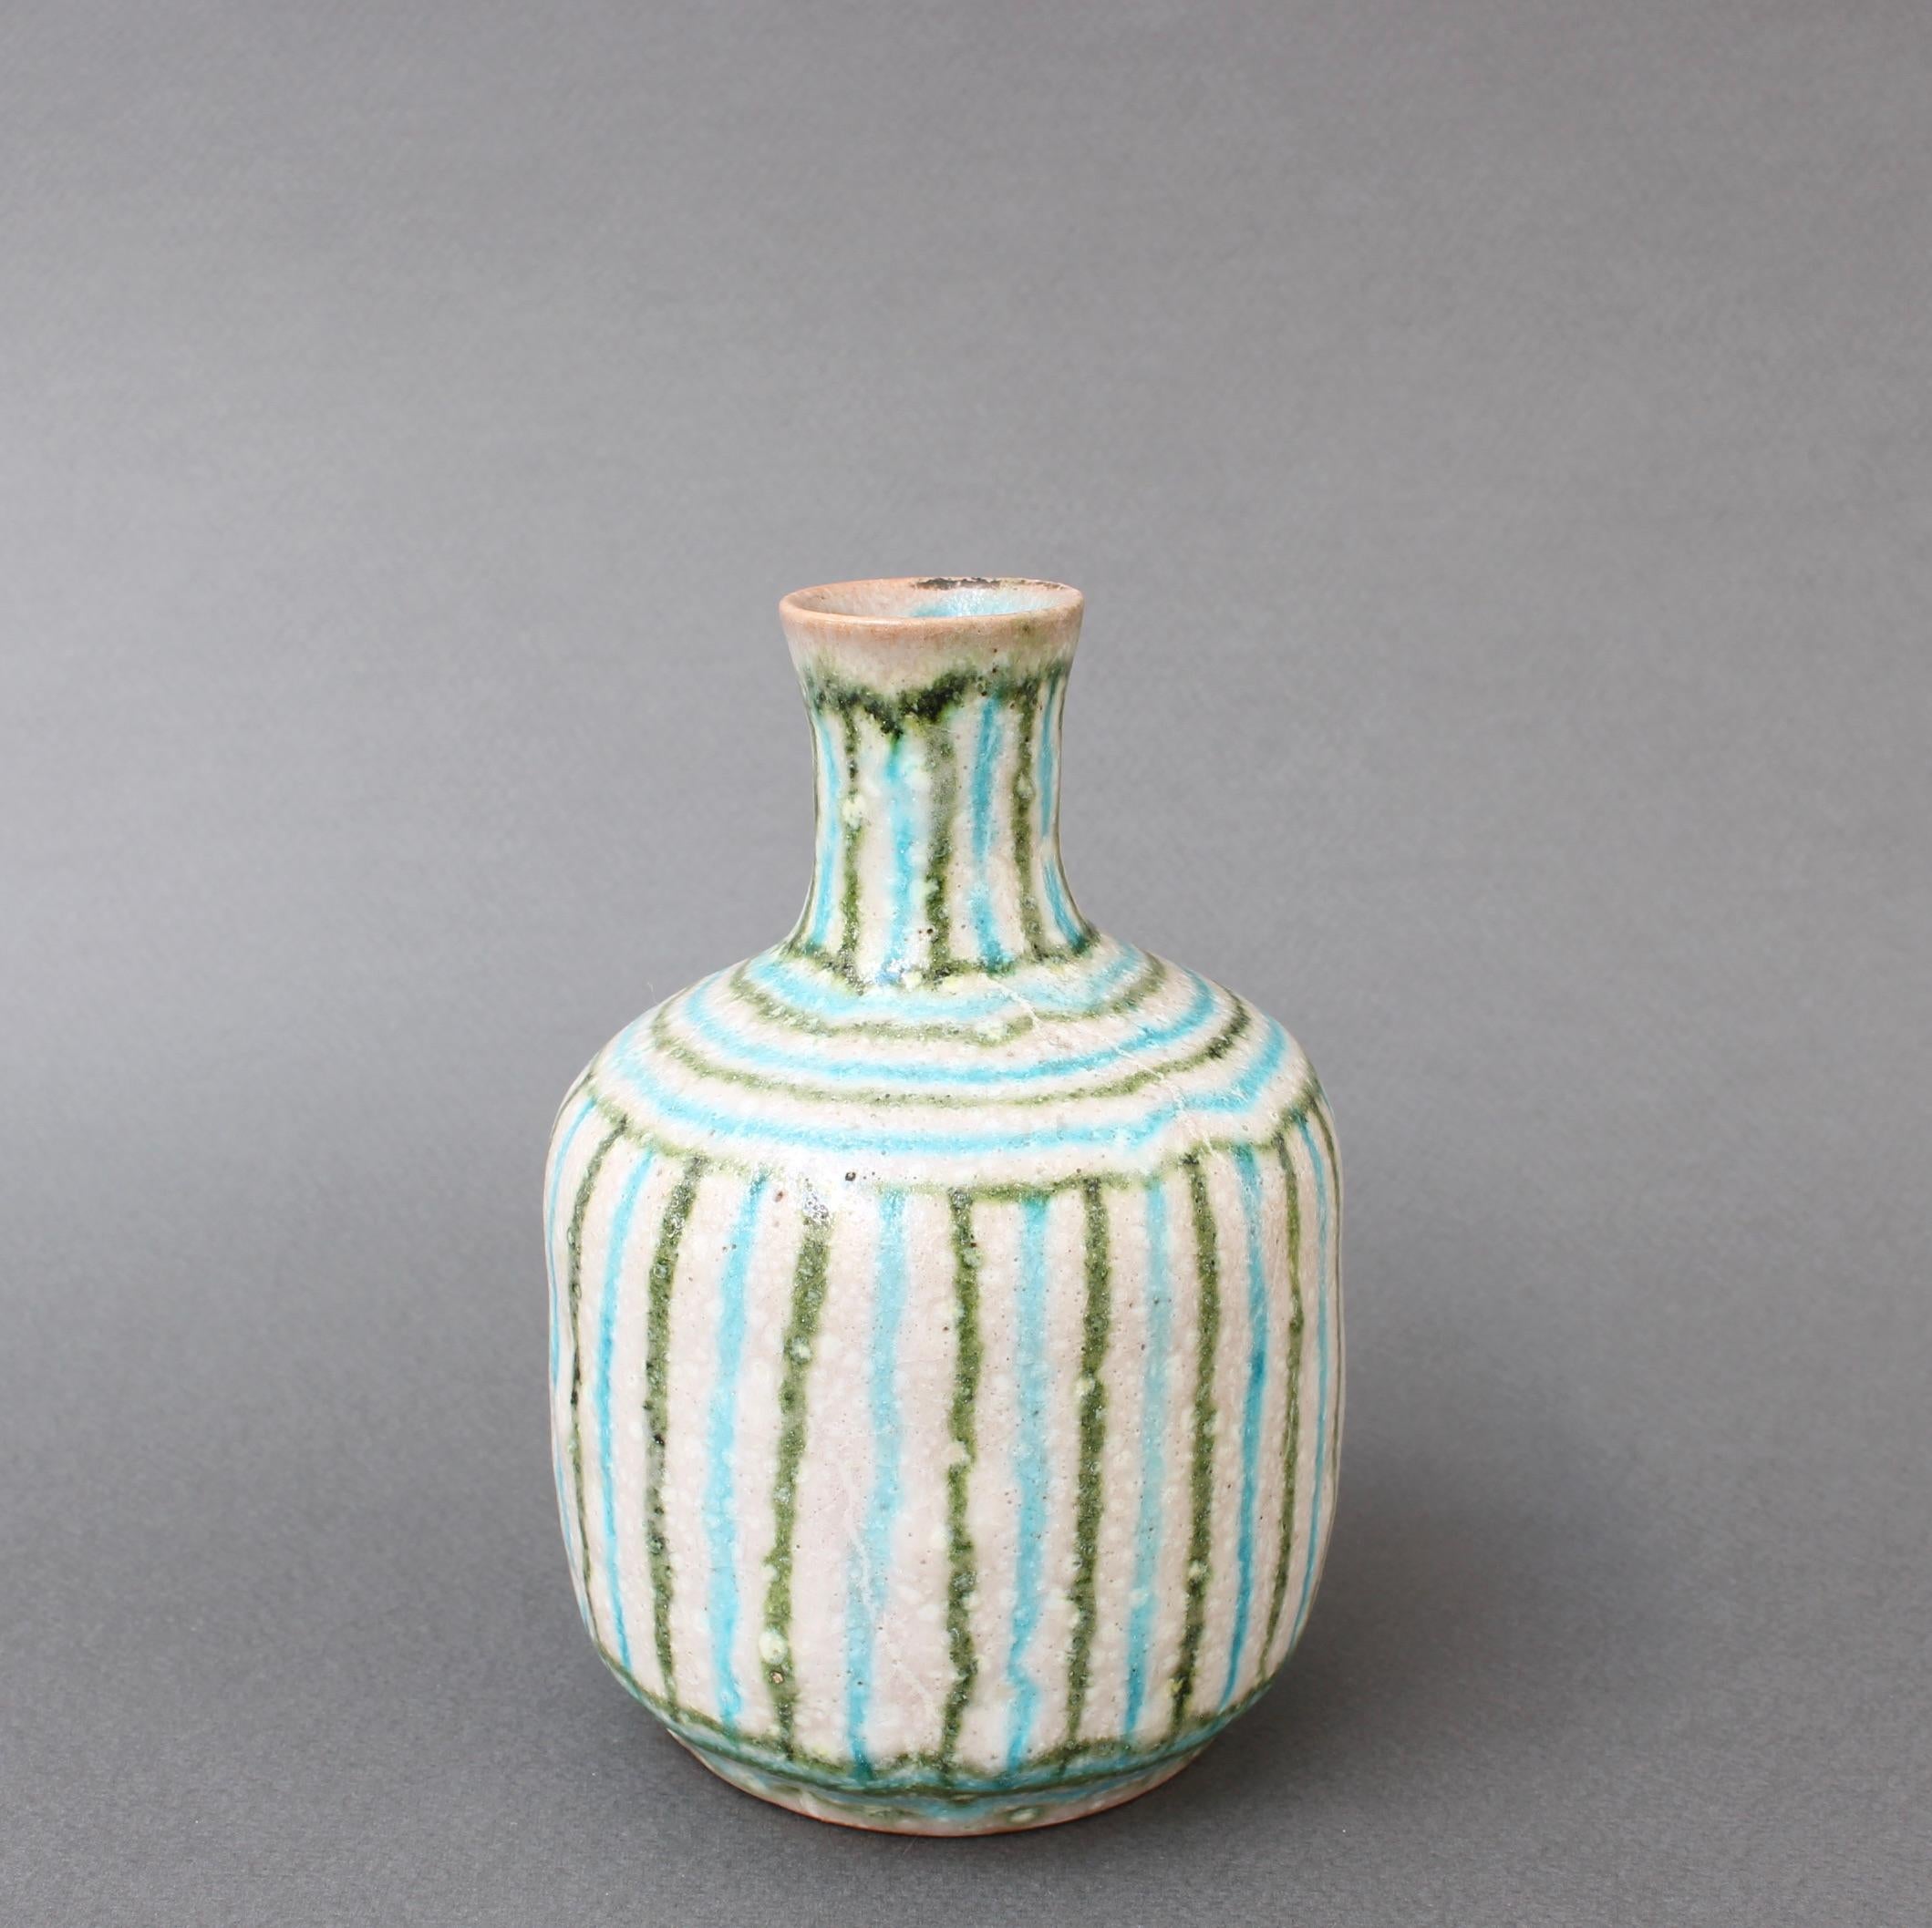 Small midcentury decorative ceramic vase by Guido Gambone, (circa 1950s). Another work of art by the formidable Guido Gambone, this diminutive pieces Form is reminiscent of ancient vessels. The vertical linear pattern in green and baby blue is